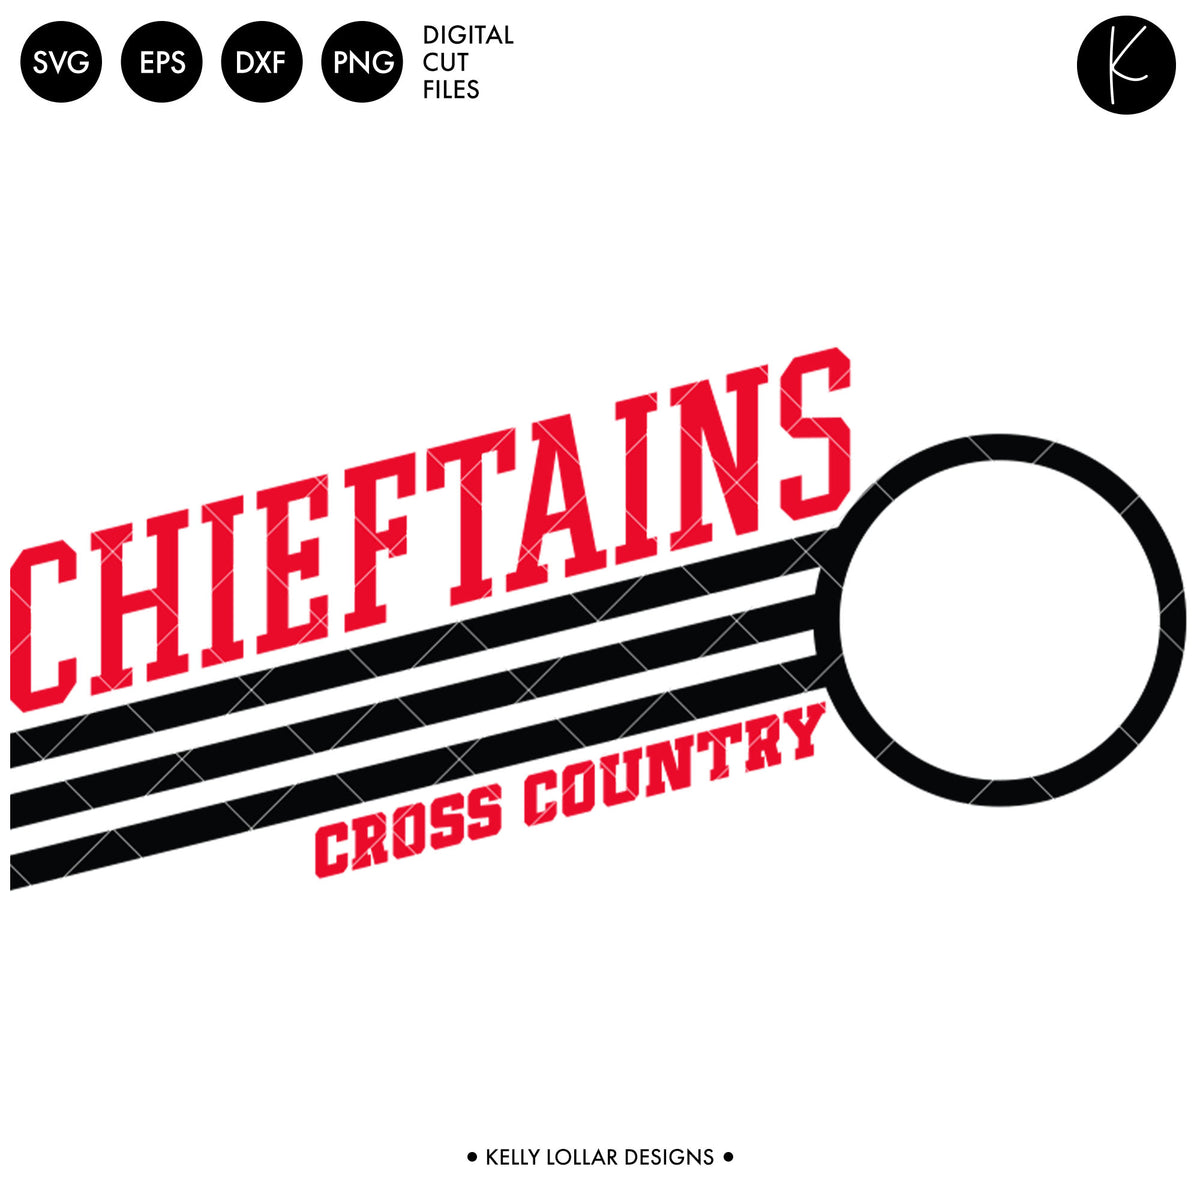 Chieftains Cross Country Bundle | SVG DXF EPS PNG Cut Files